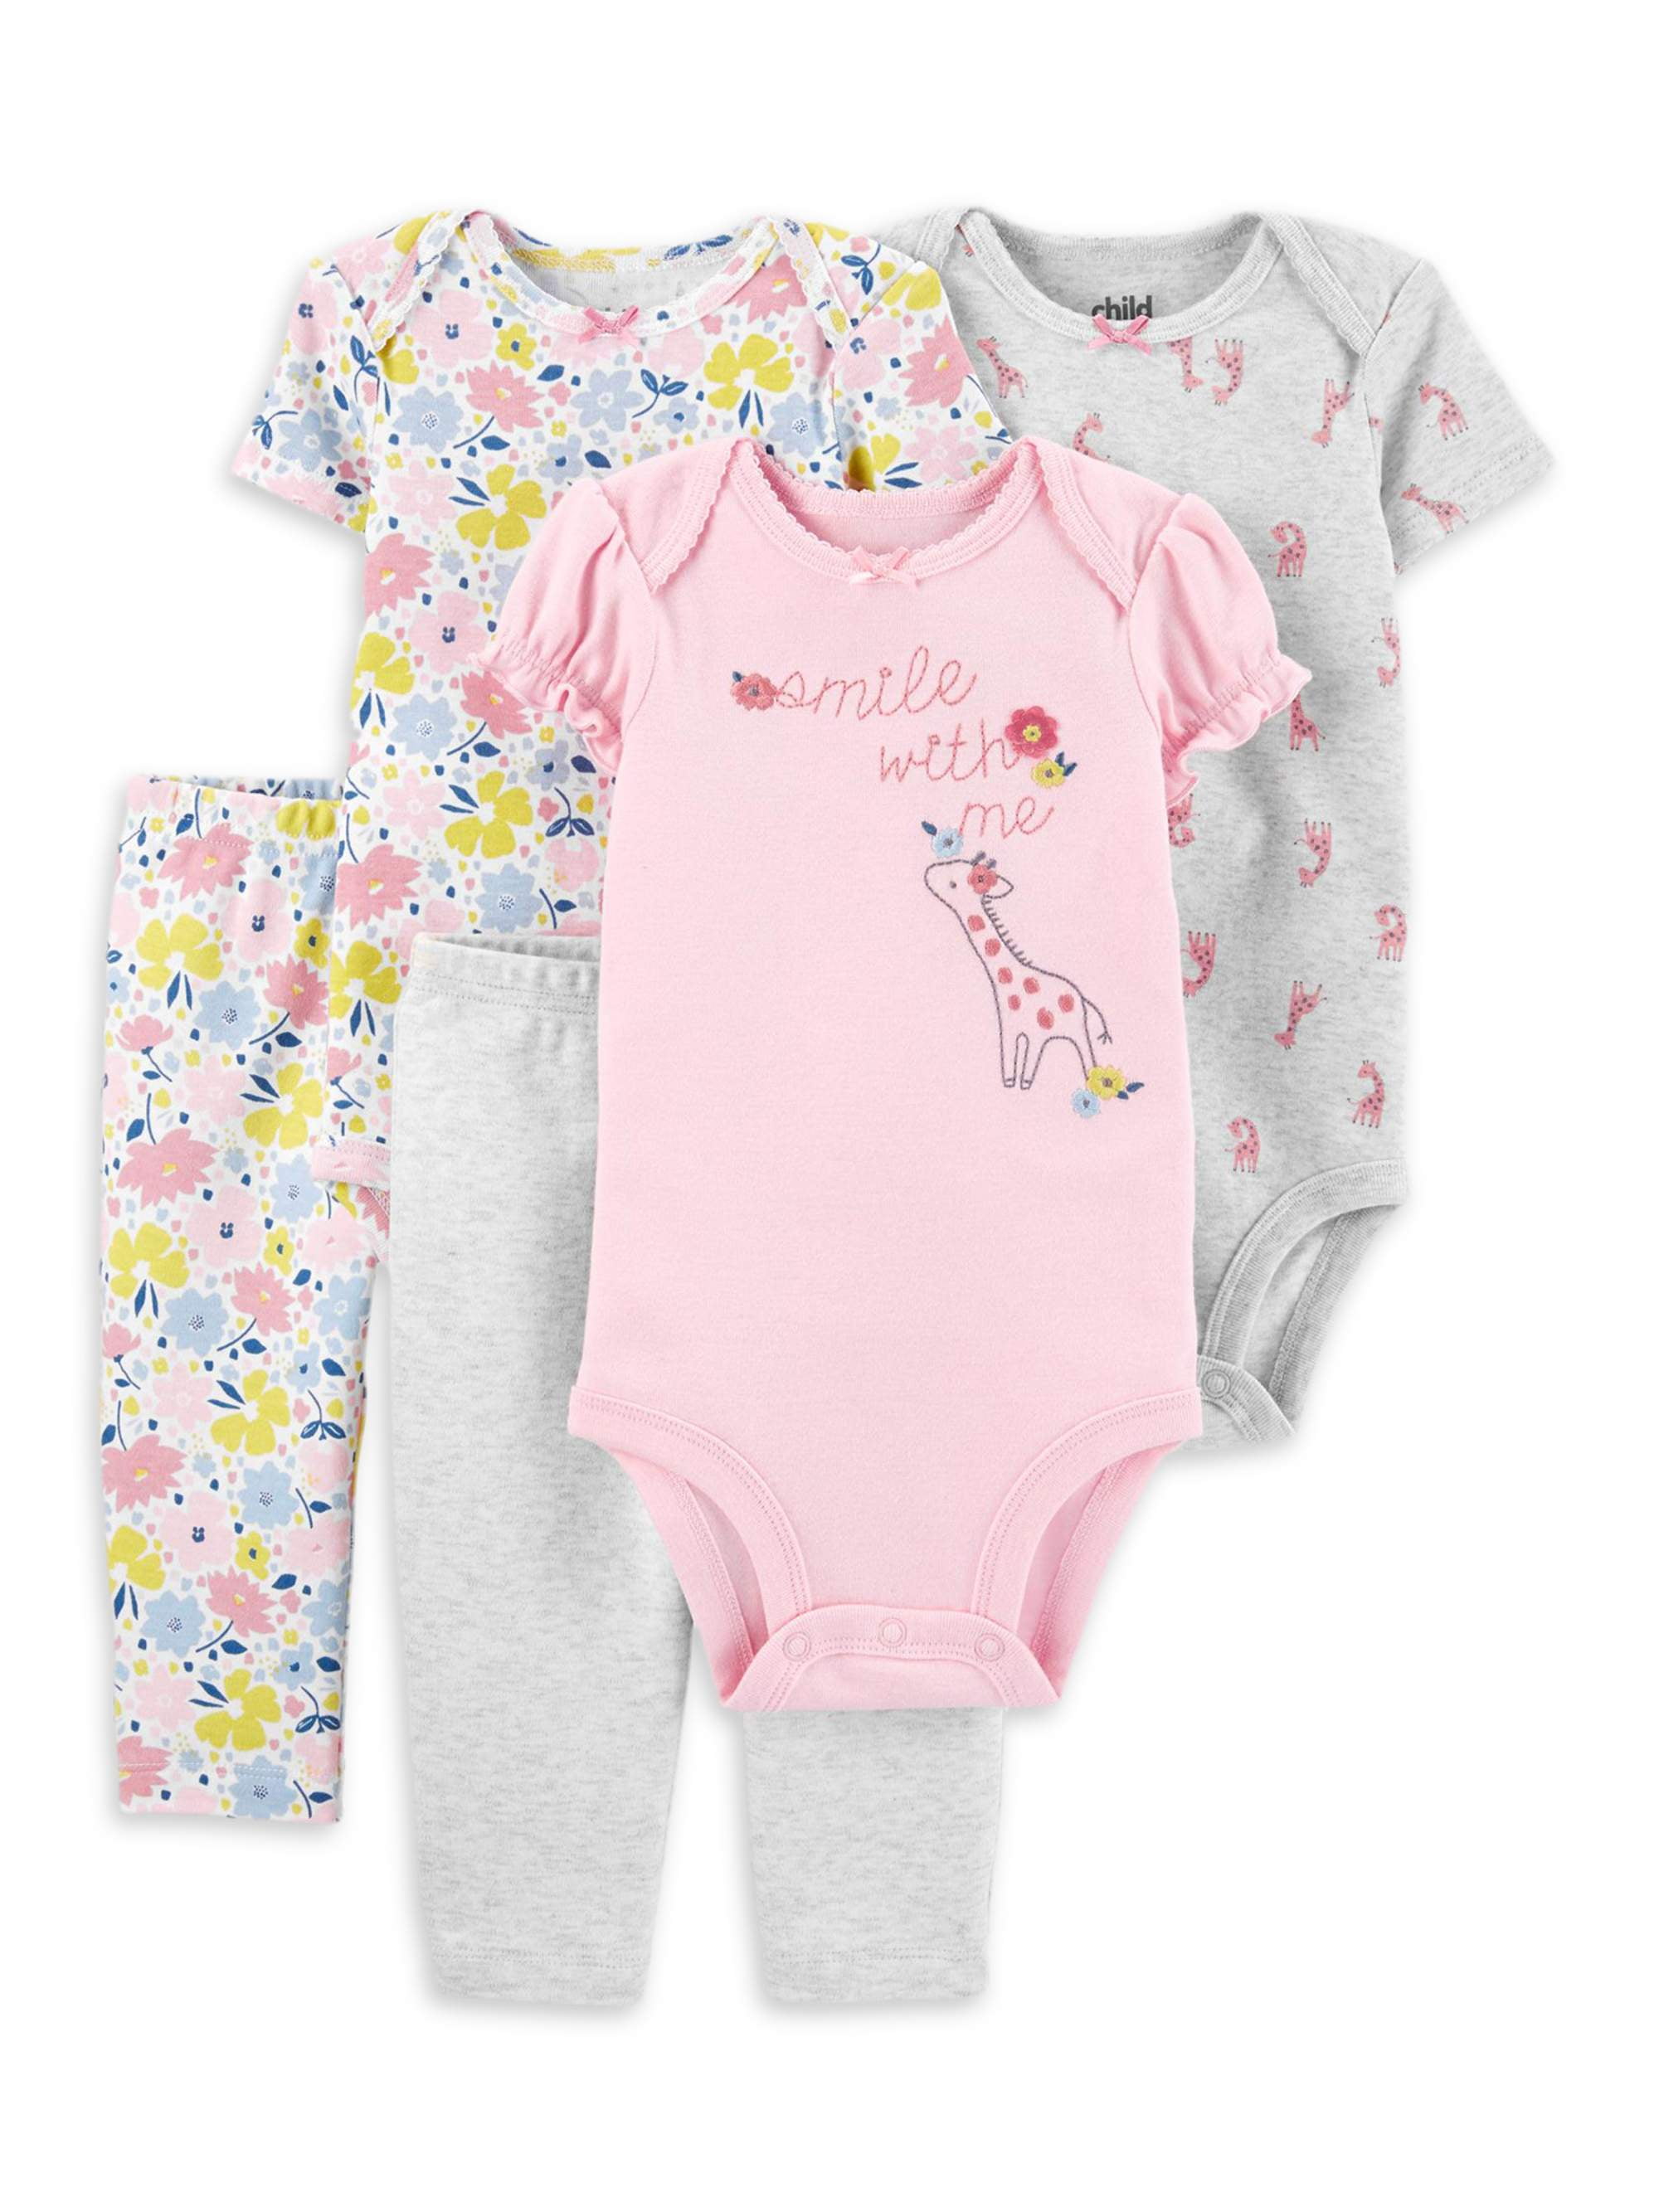 Details about   NWOT Carter's Baby Girls' 5-Pack Original Bodysuit Sets In Various Sizes 